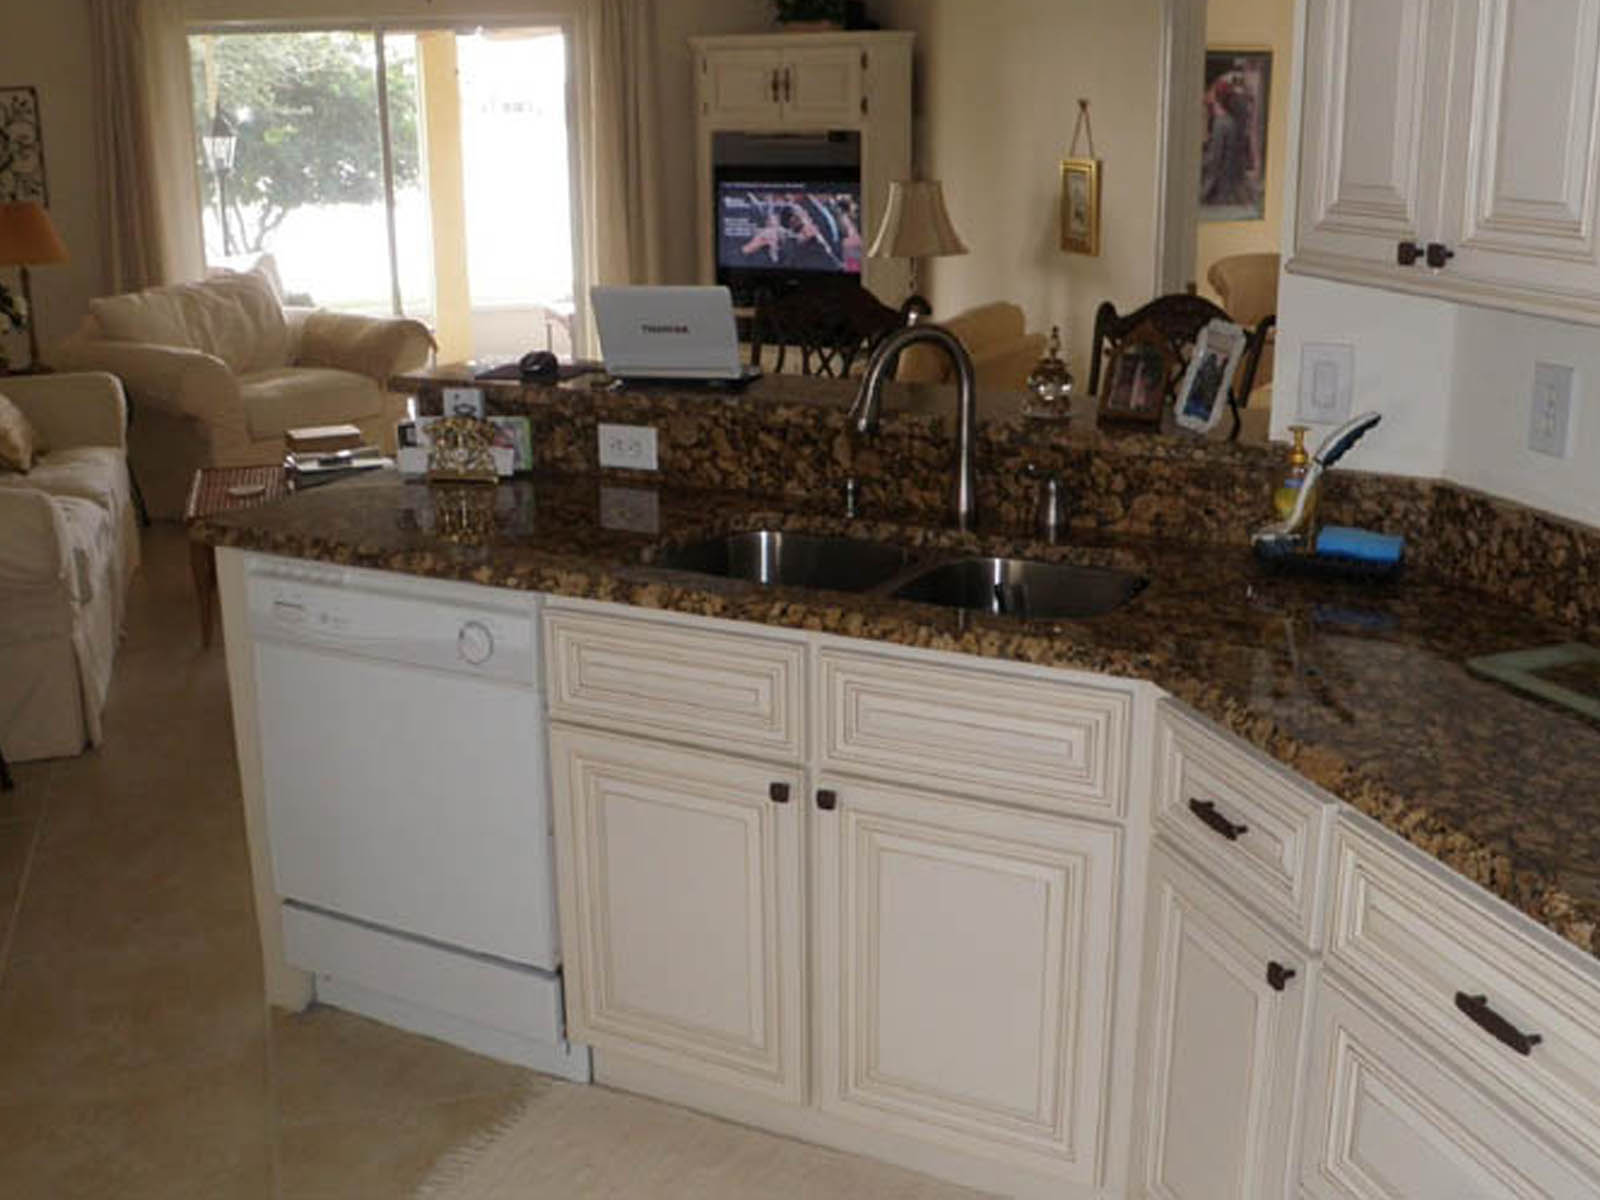 Kitchen with granite countertops before a living room with couches around a tv